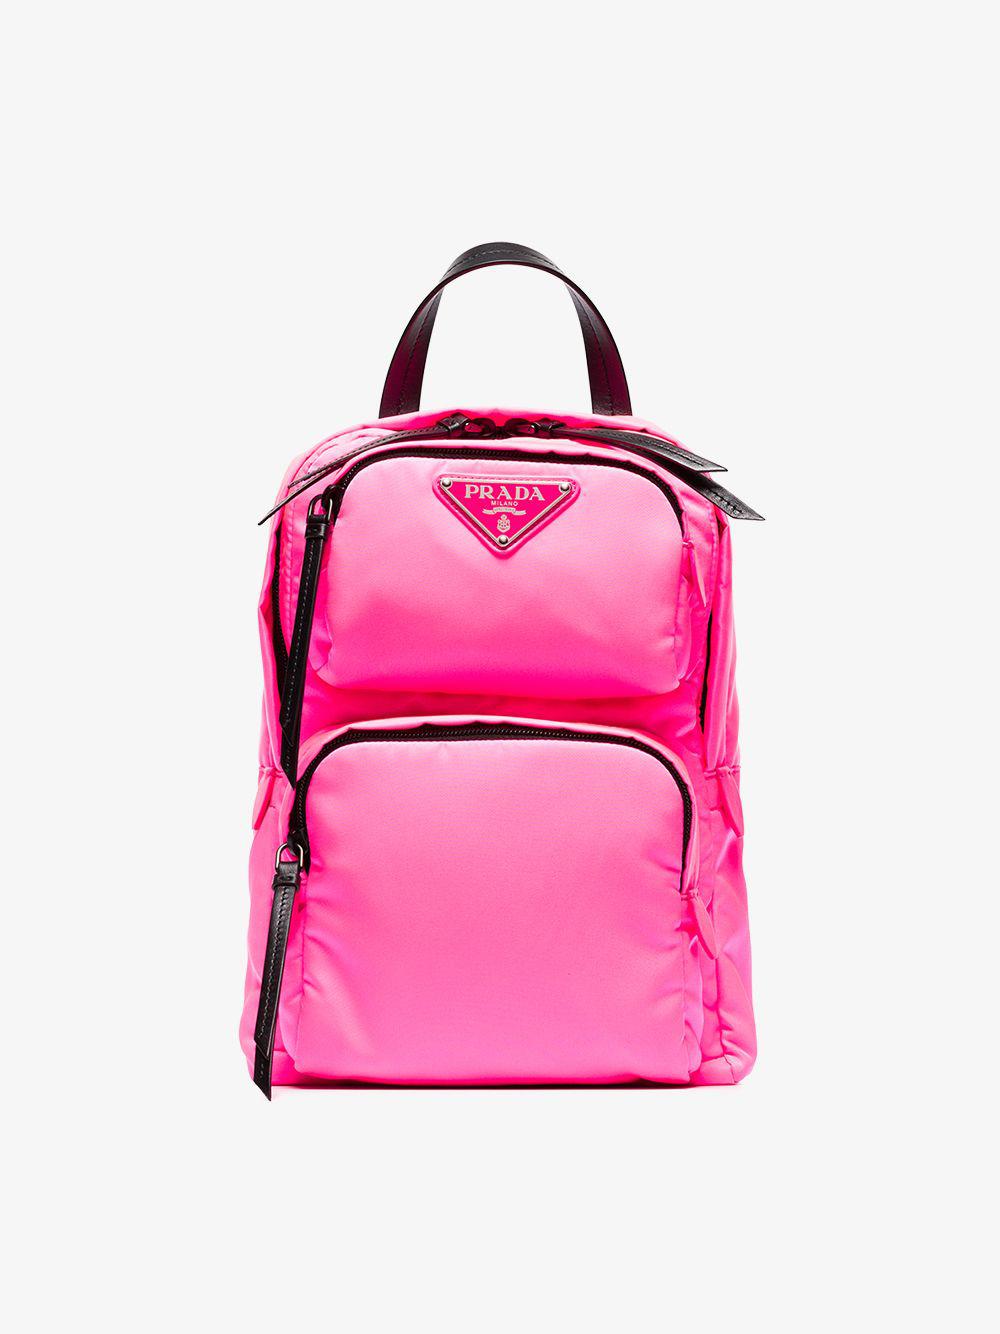 Prada Leather Trimmed Nylon Backpack in Pink | Lyst